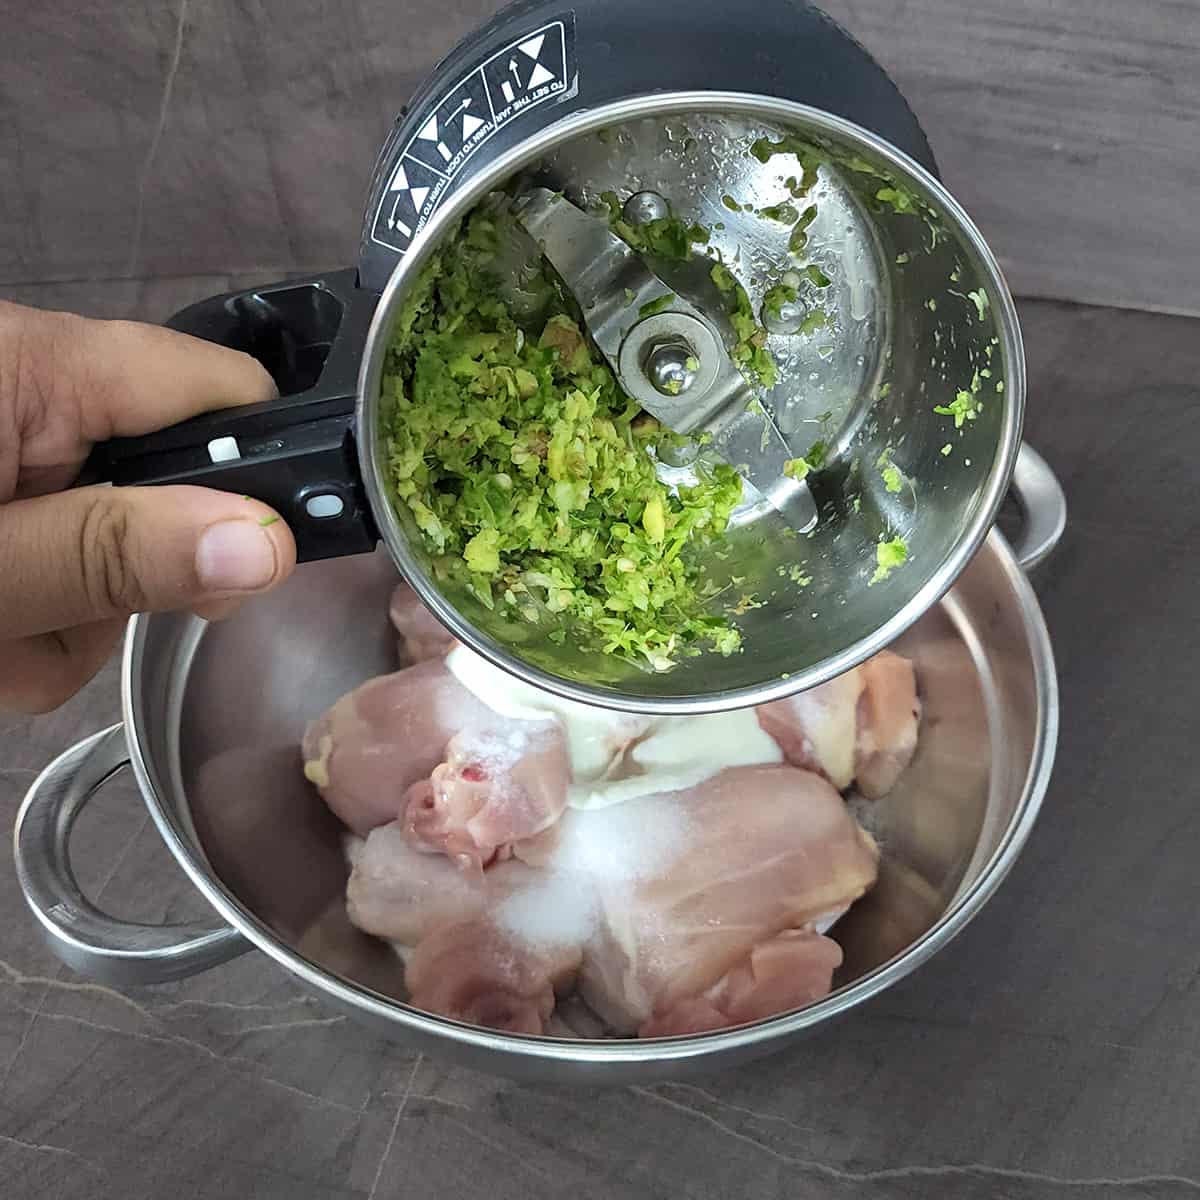 Add the coarse paste of fresh ginger, garlic and green chilies from blender to marinate chicken. 